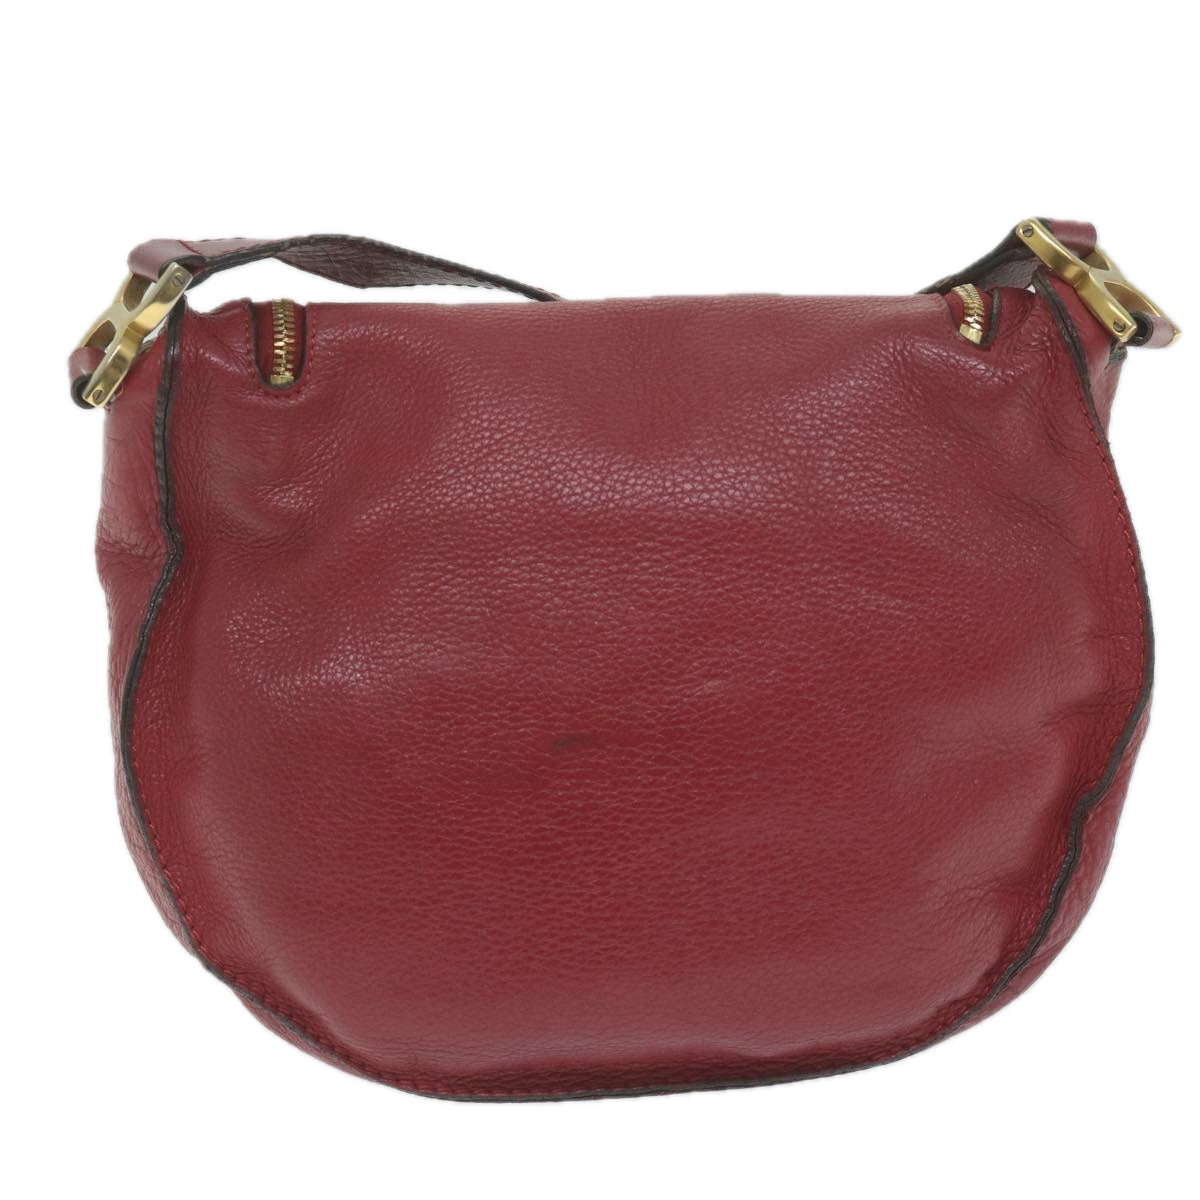 Chloe Mercy Shoulder Bag Leather Red Auth am5320 - 0